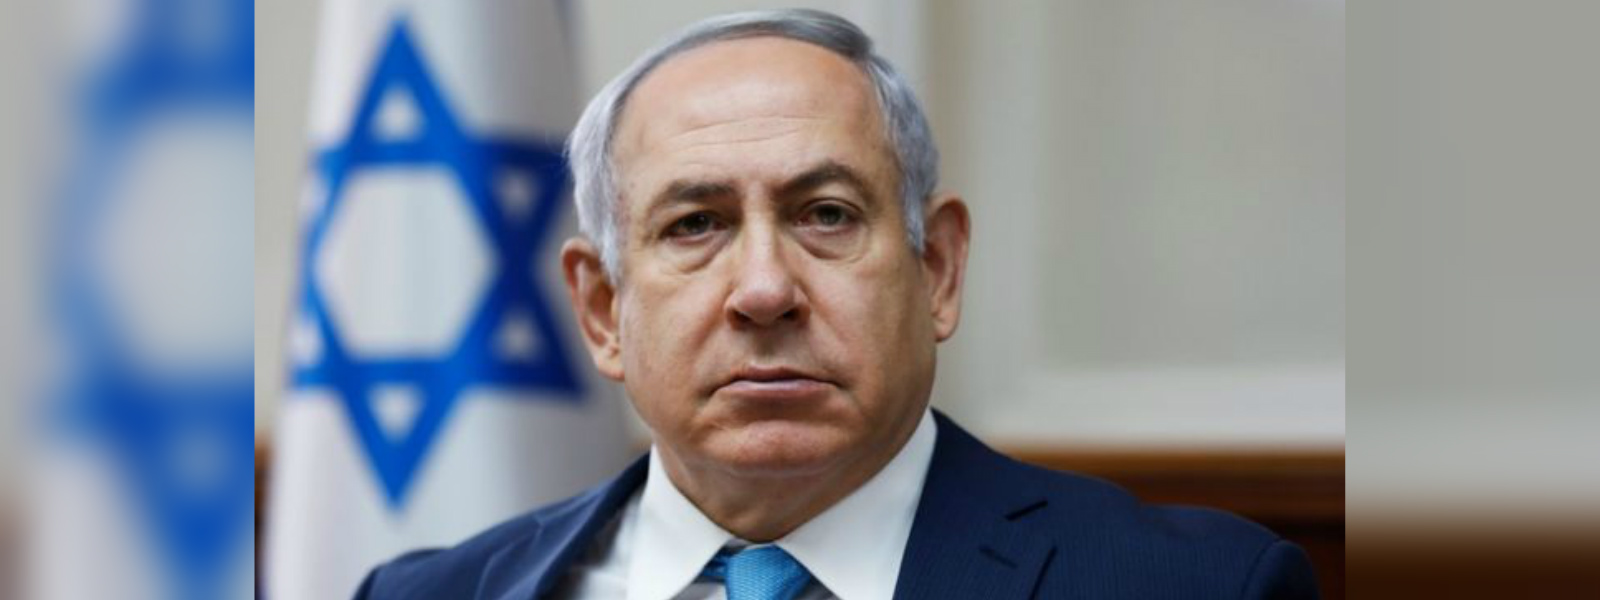 Netanyahu calls for harsher stance on Iran